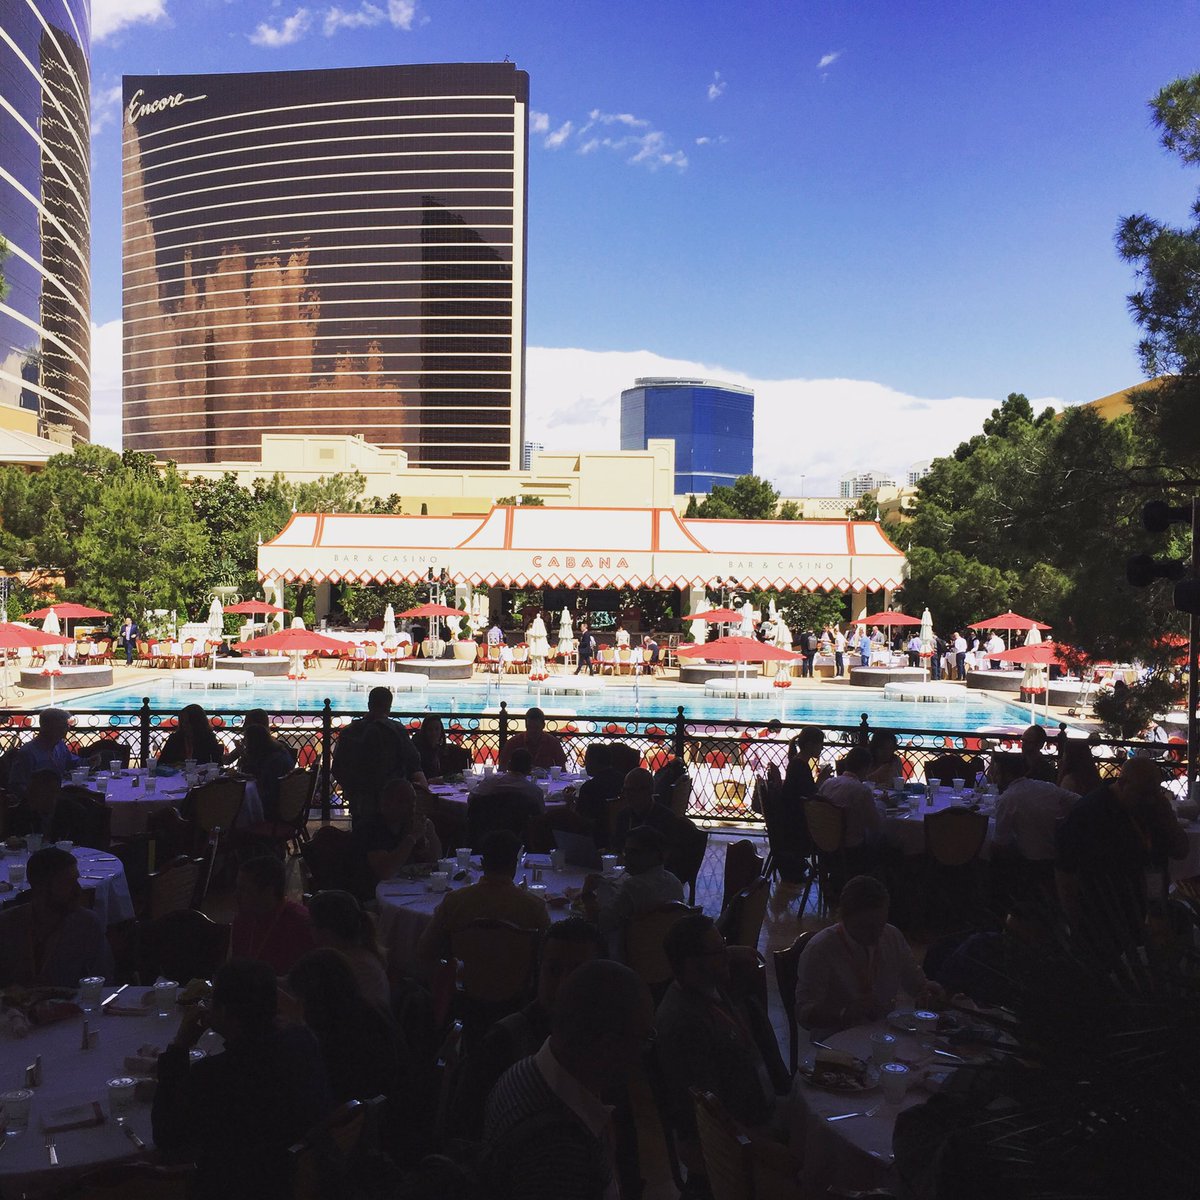 chris_vancity: Lunch time at #MagentoImagine https://t.co/4nU7O7GiAy